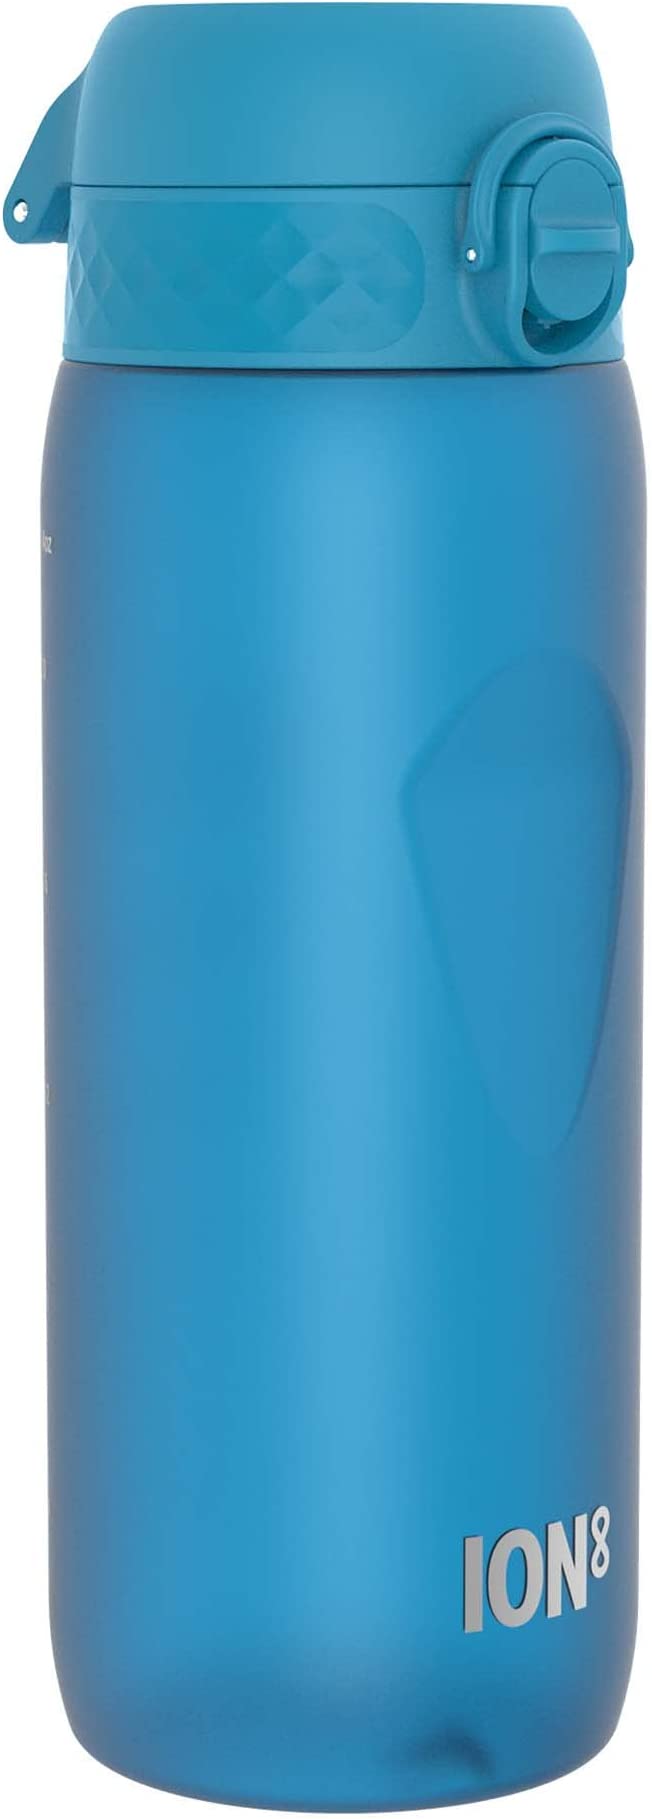 ION8 CYCLING WATER BOTTLE SONIC BLUE 750ML